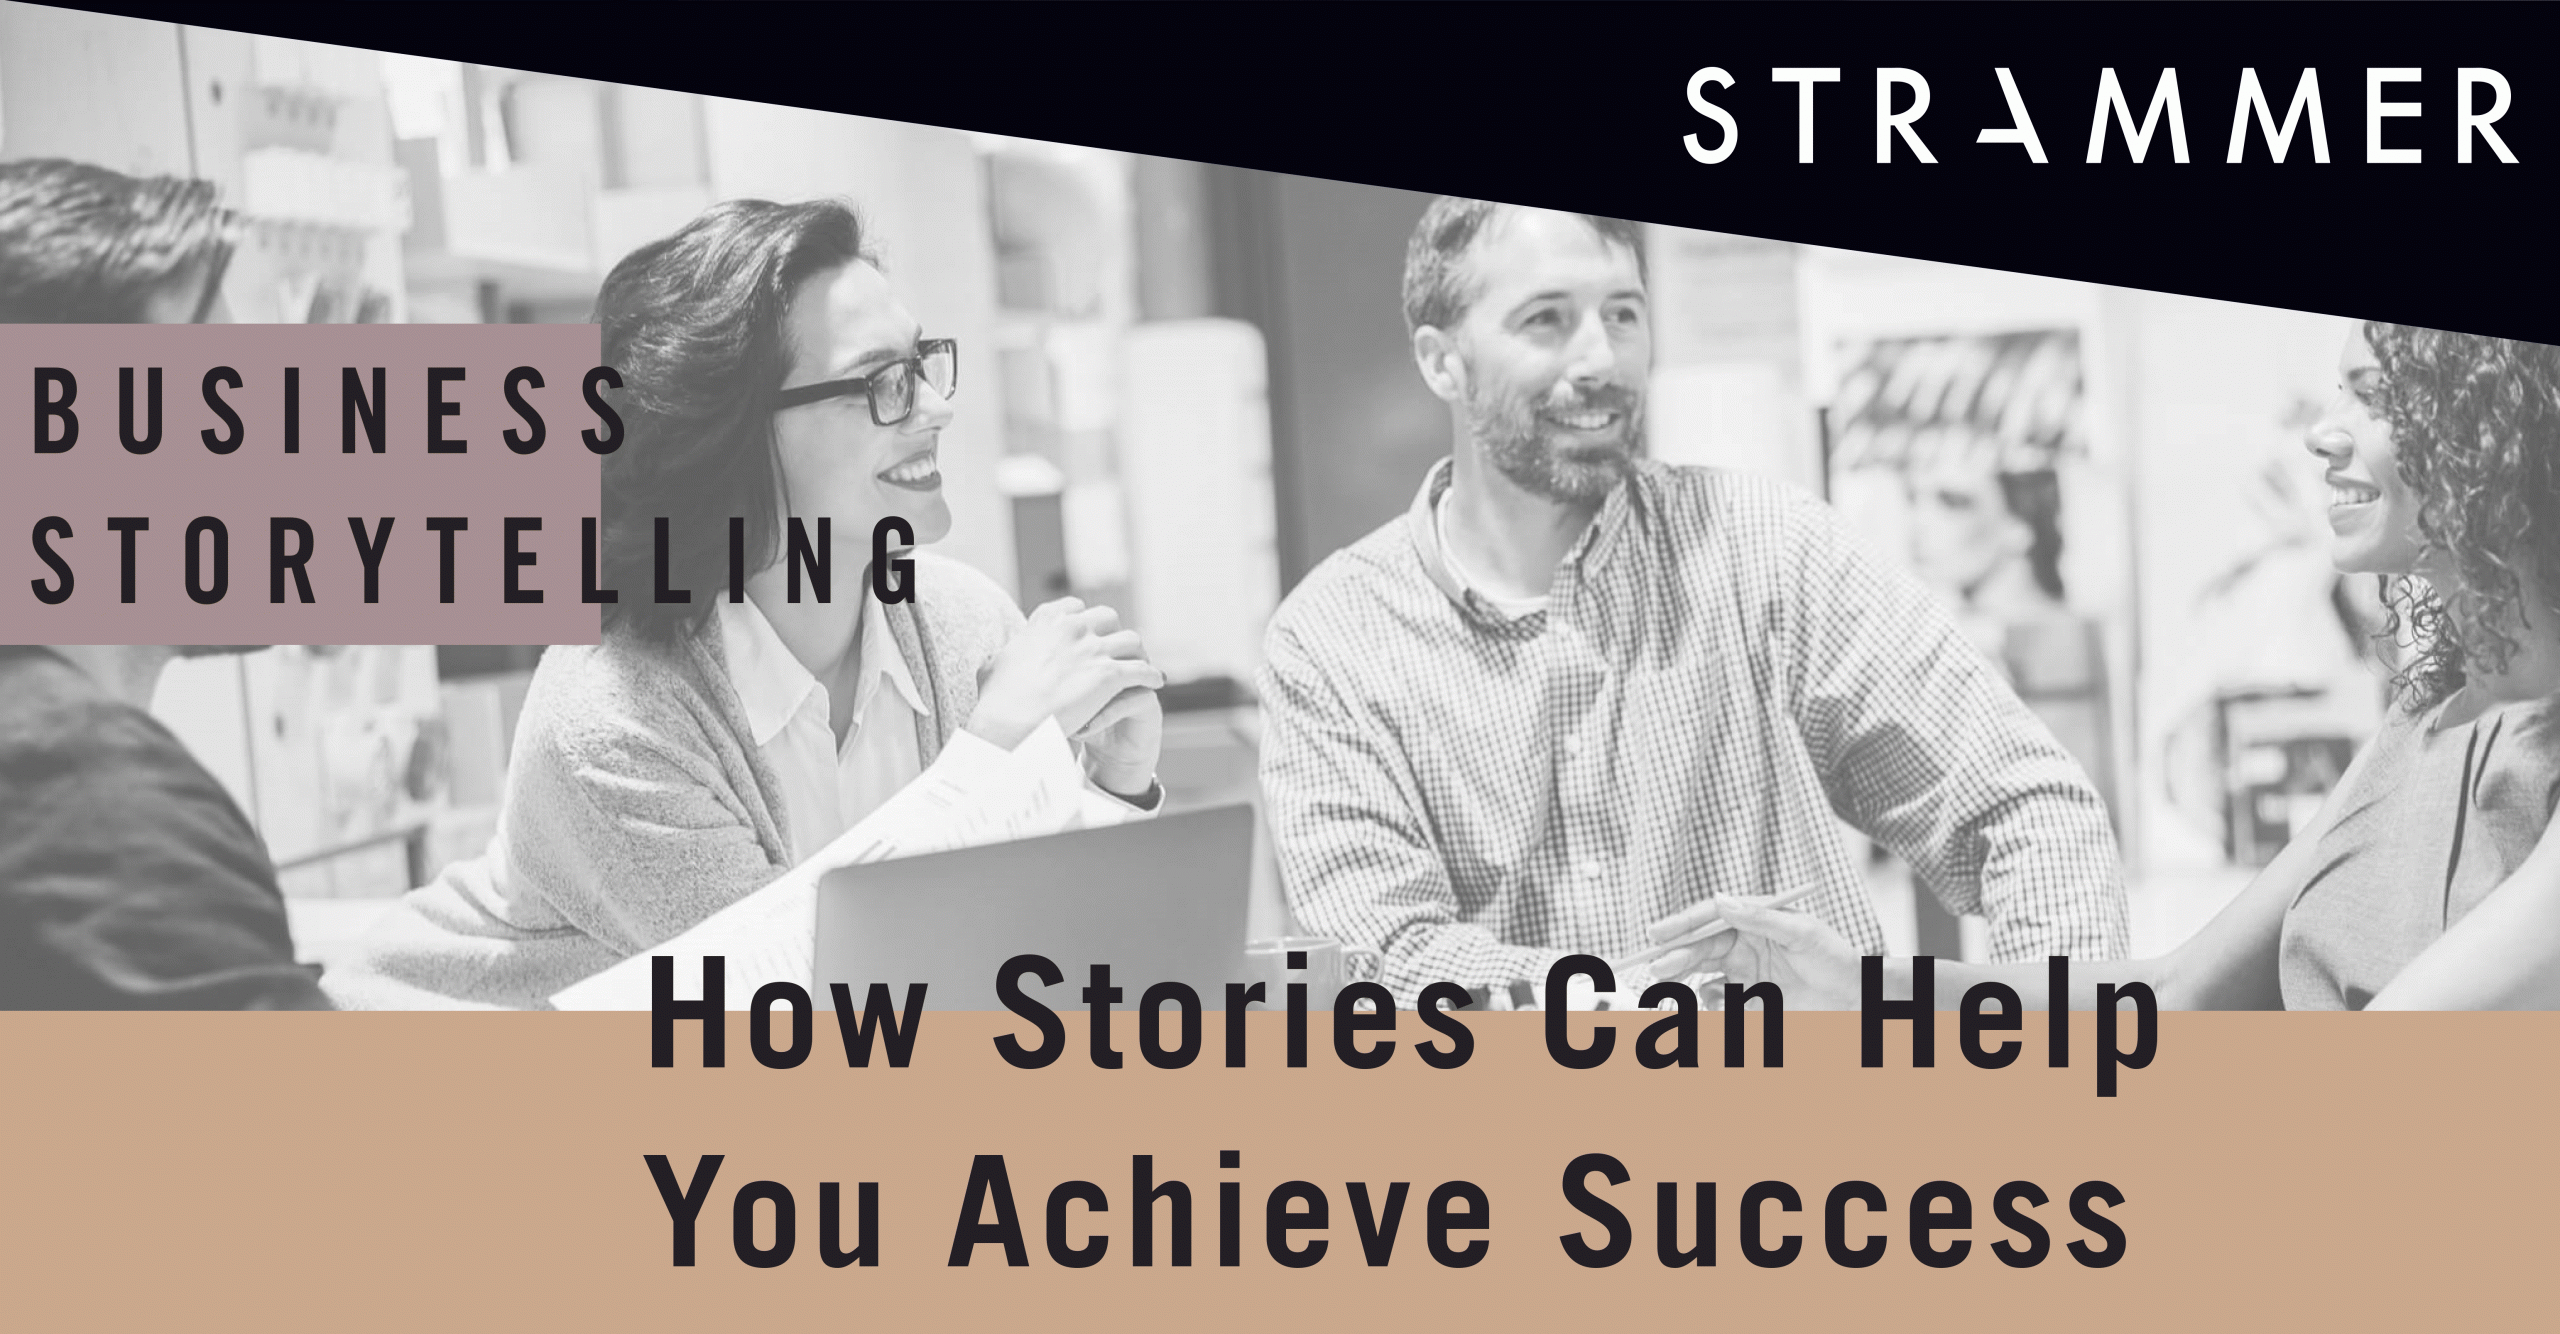 Business Storytelling: Why Should We Invest in It?